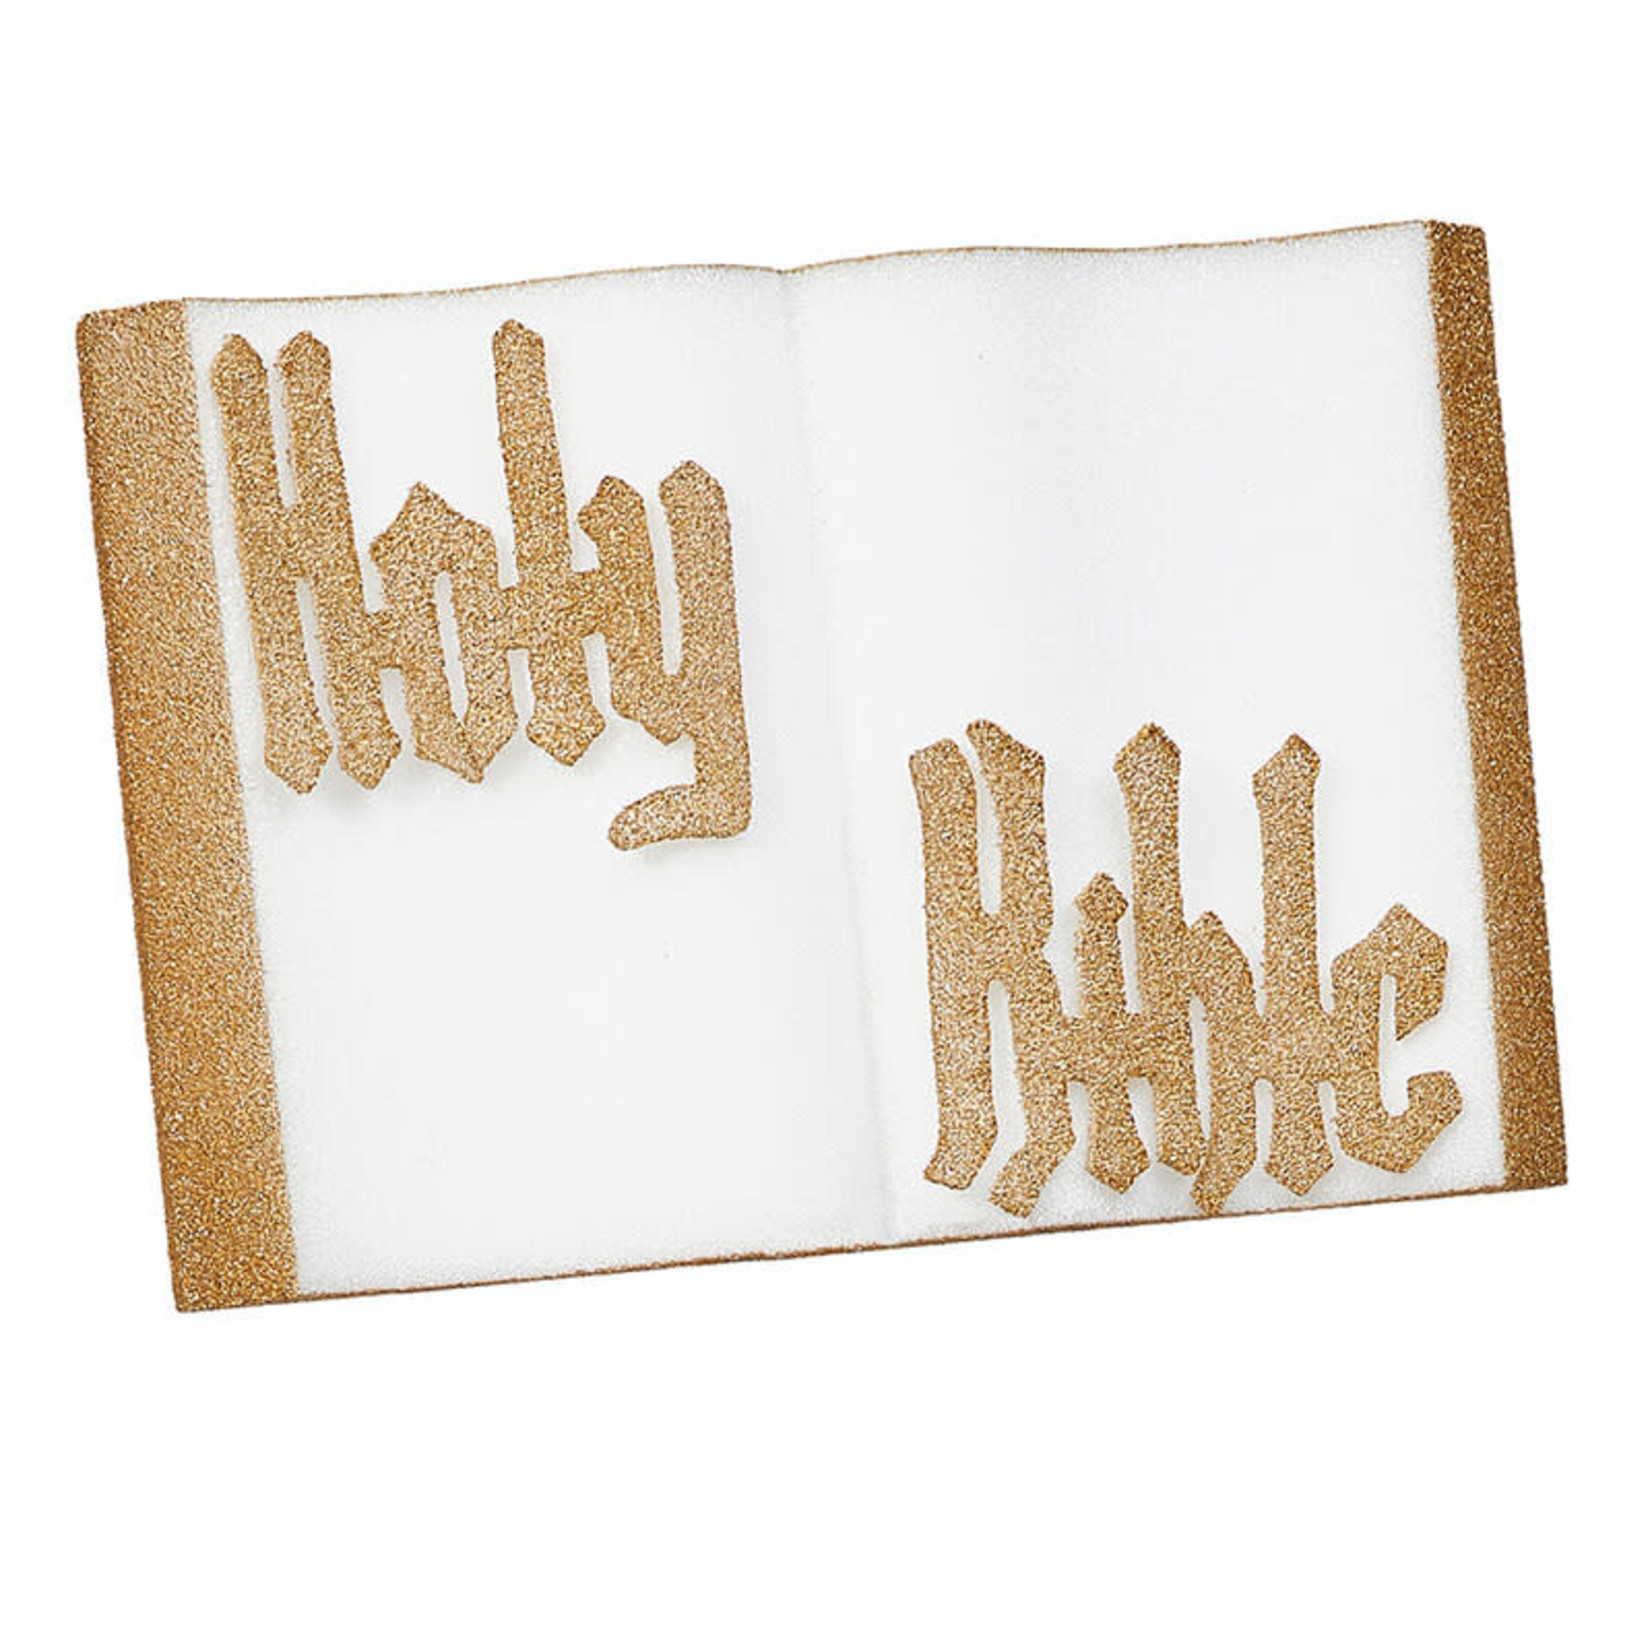 STYROFOAM BIBLE 18 X 12 X 2’’ WHITE W GOLD EDGE AND LETTERS